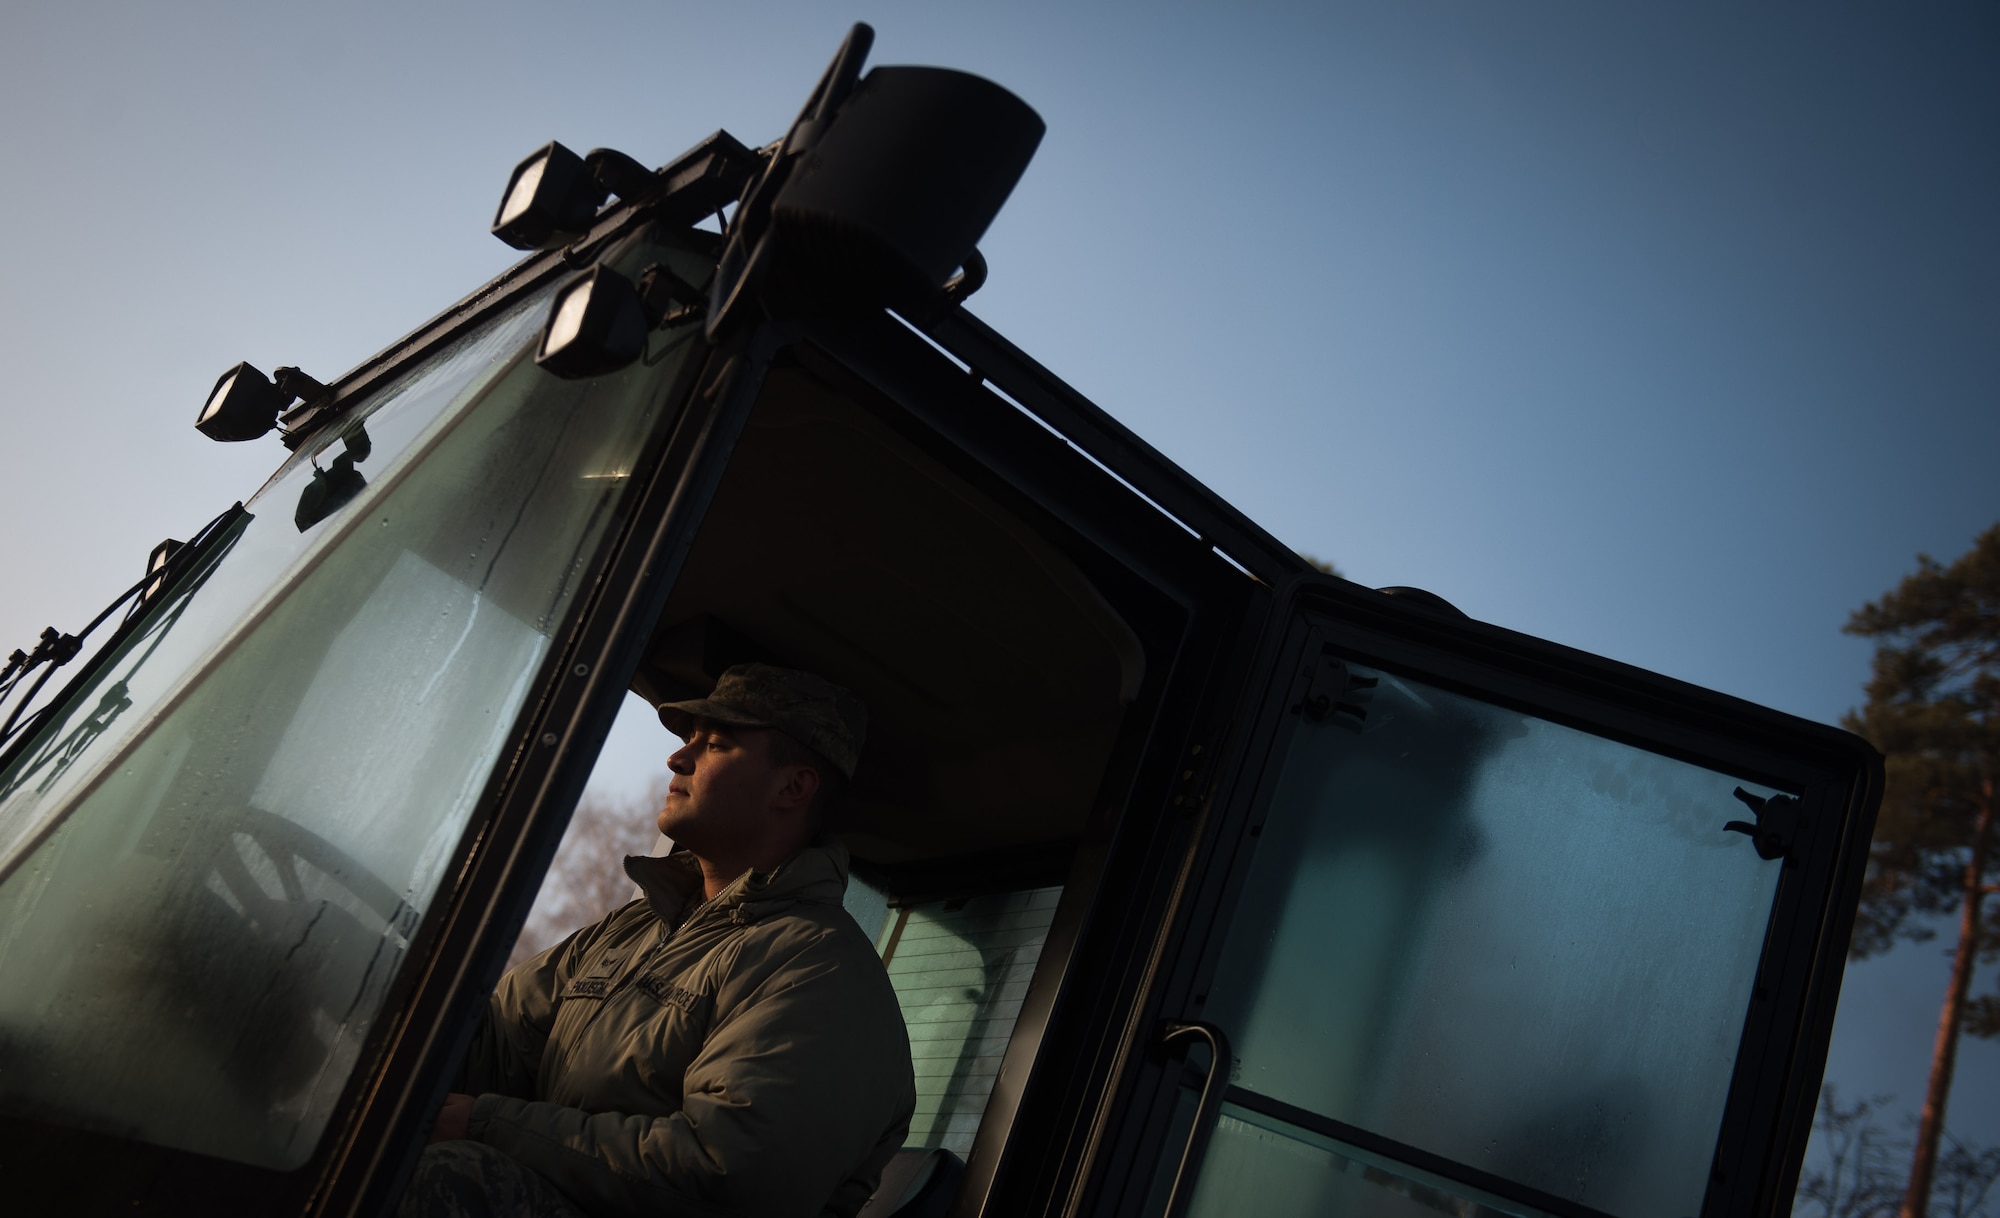 Senior Airman Christopher Pakusch, 1st Combat Communications Squadron electrical power production journeyman, operates a forklift during a mock deployment at Ramstein Air Base, Germany, Feb. 17, 2017. Pakusch and other 1 CBCS Airmen must manage their job skills at a high-efficiency level in order to remain deployment-ready throughout the year. (U.S. Air Force photo by Senior Airman Lane T. Plummer)